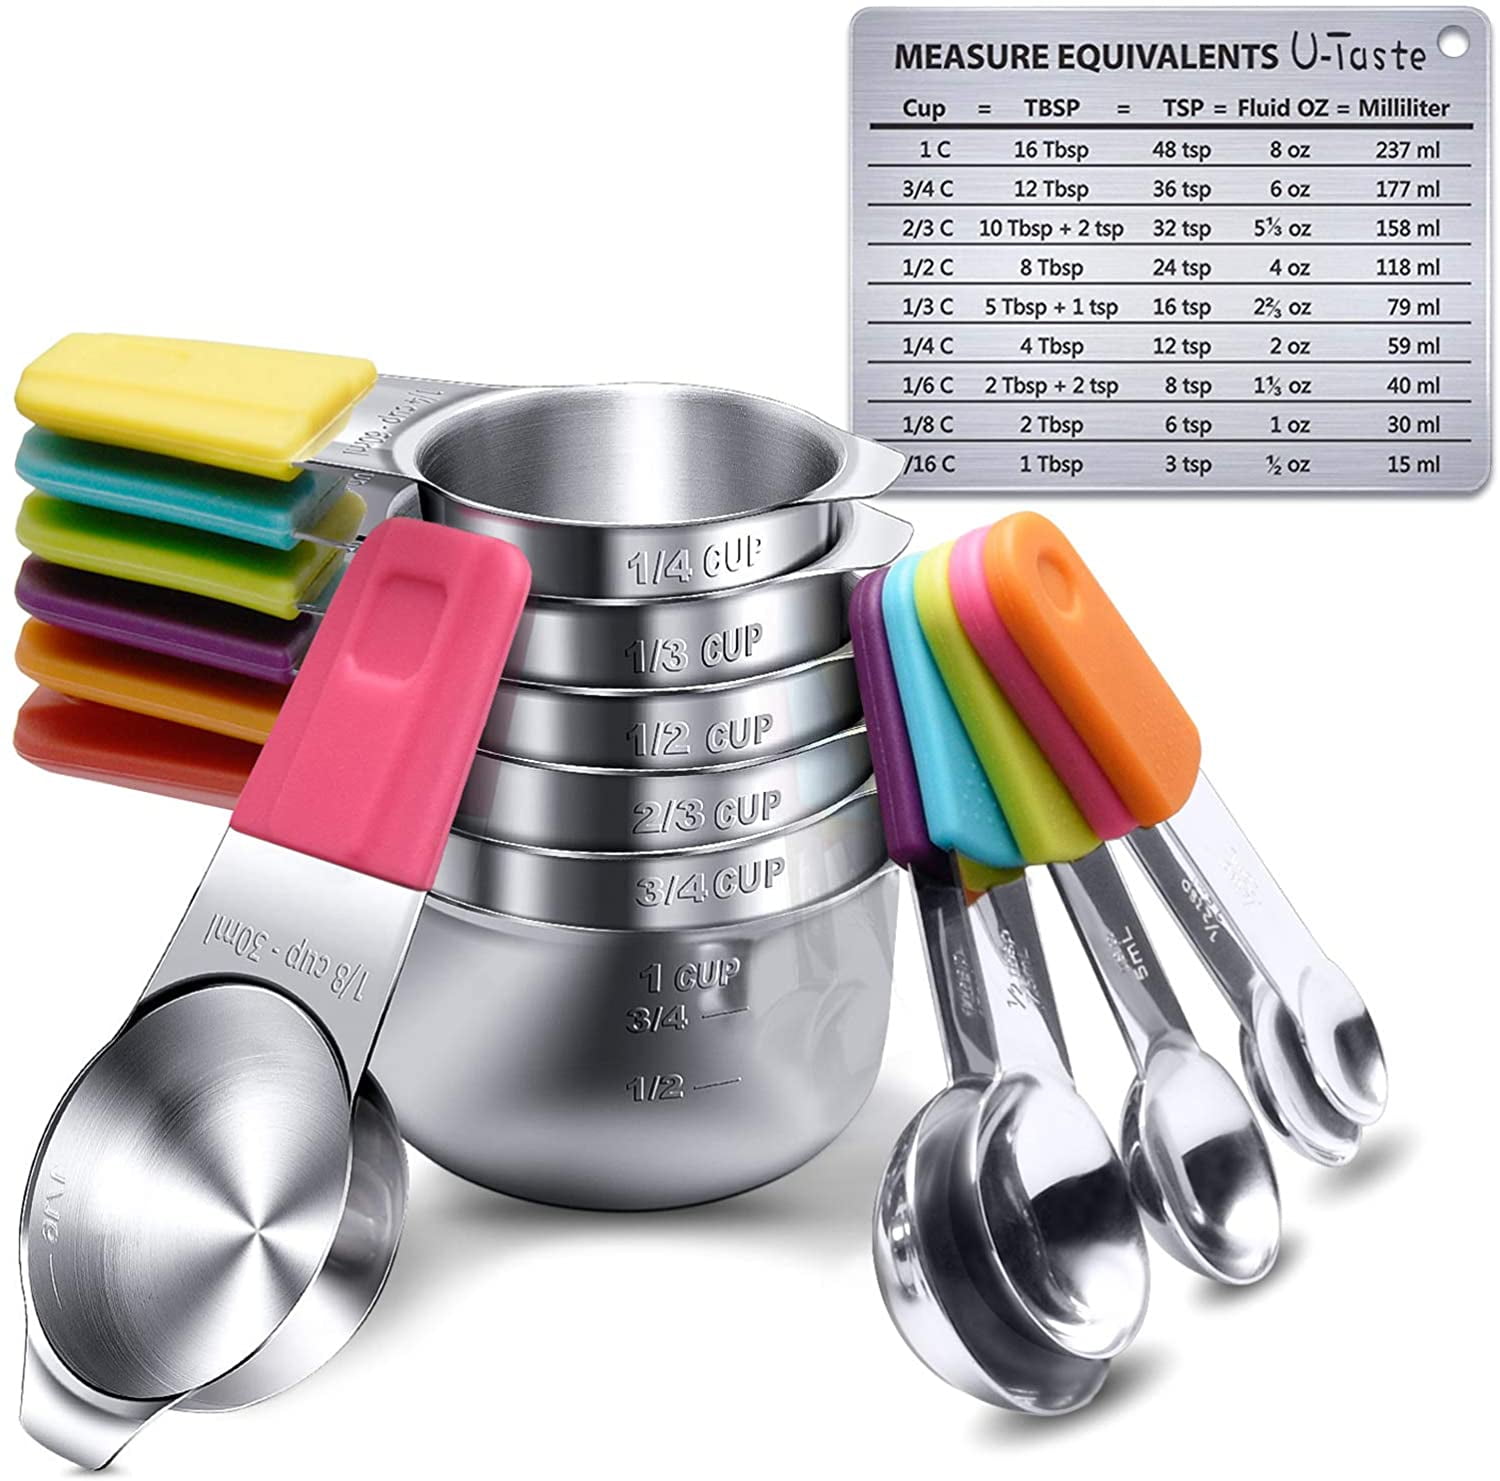 Measuring Cups and Spoons Set: U-Taste 18/8 Stainless Steel 10 Pieces Metal  Stacking Kitchen Baking Cooking Food Measure Set 5 Cups 5 Spoons